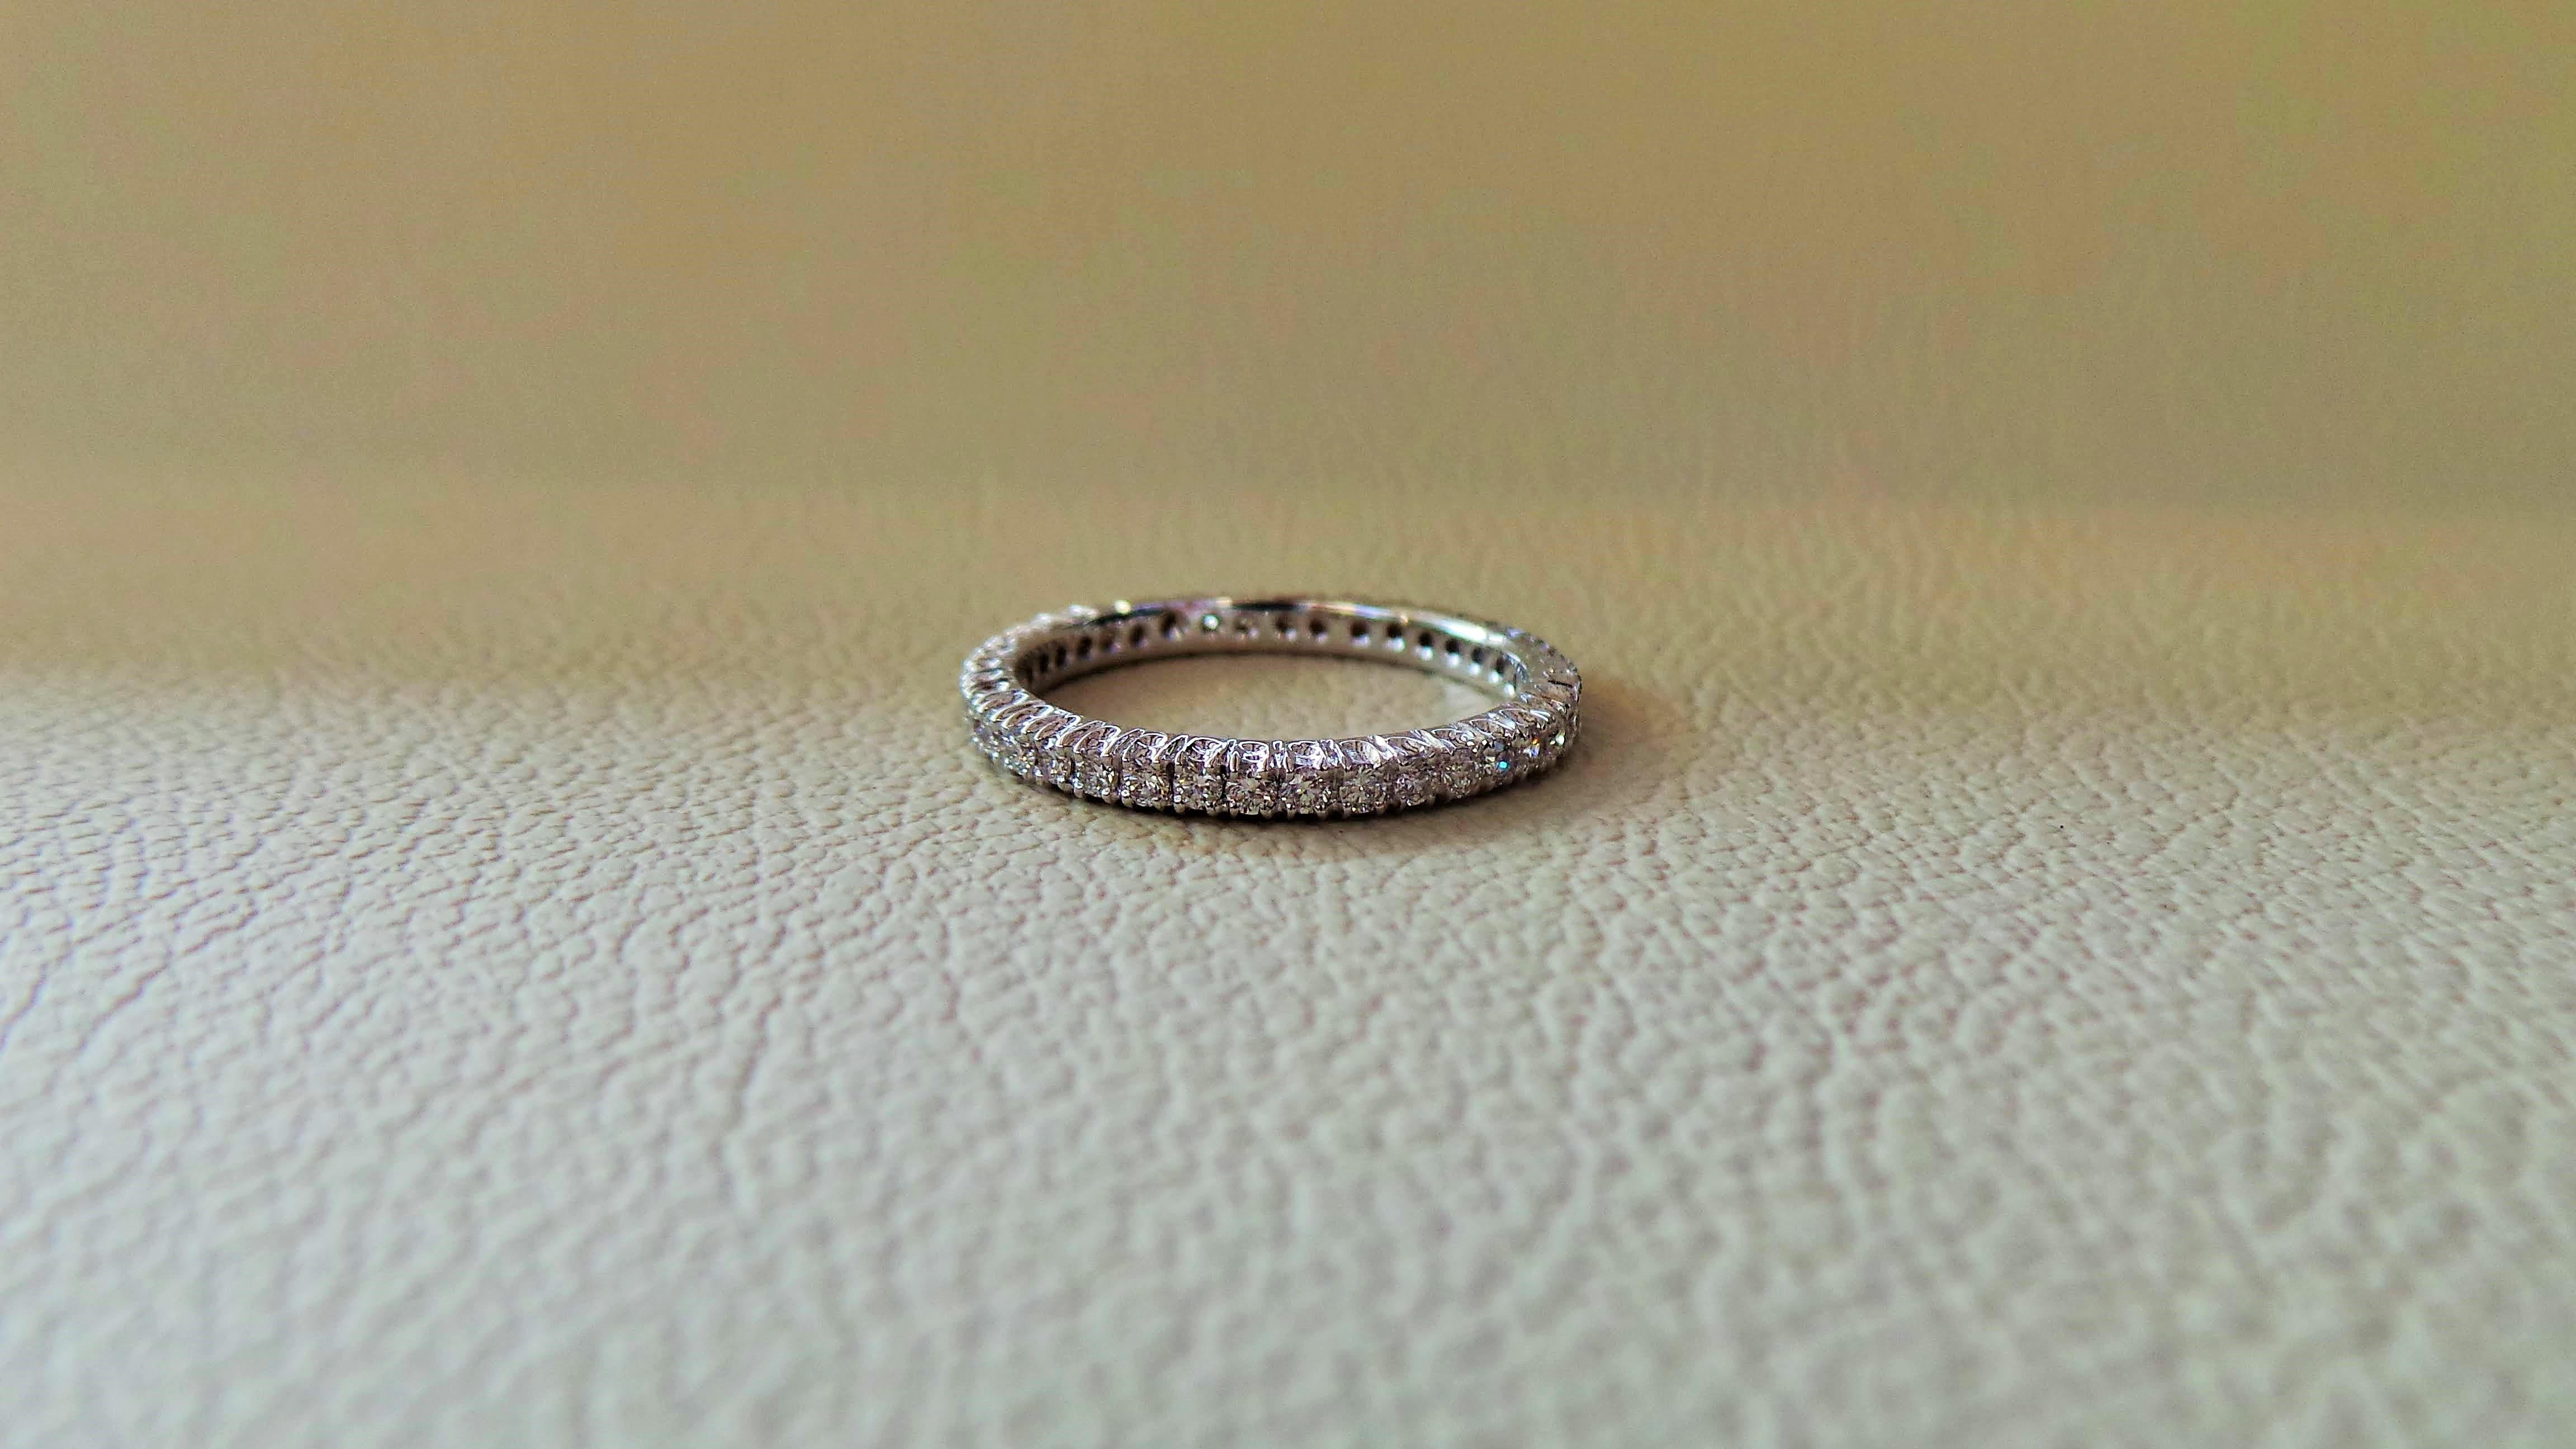 Andrea Macinai design a dedicated collection for engament rings.  
The eternity ring has diamonds all the way around the band, which symbolizes never-ending love and commitment. It's sometimes given in addition to an engagement and wedding ring,